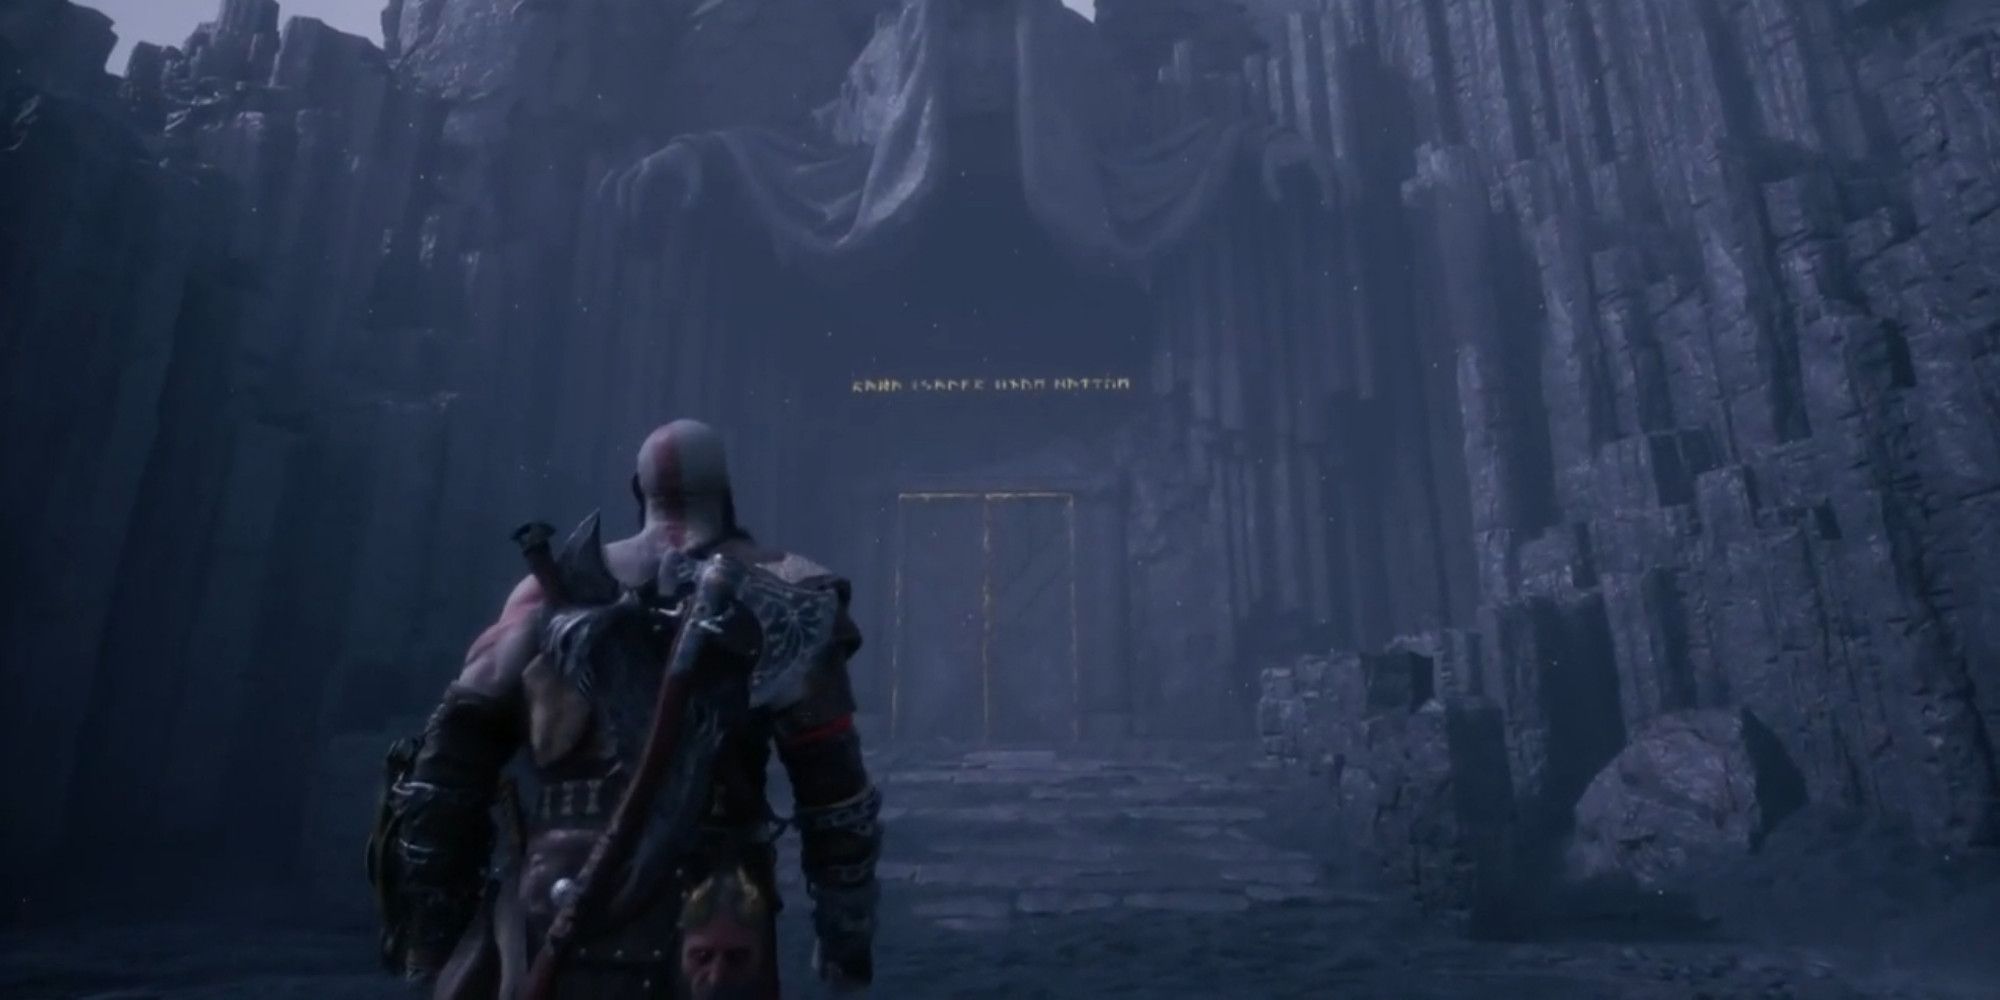 God Of War Ragnarok Valhalla Is A Free DLC Expansion And It's Out